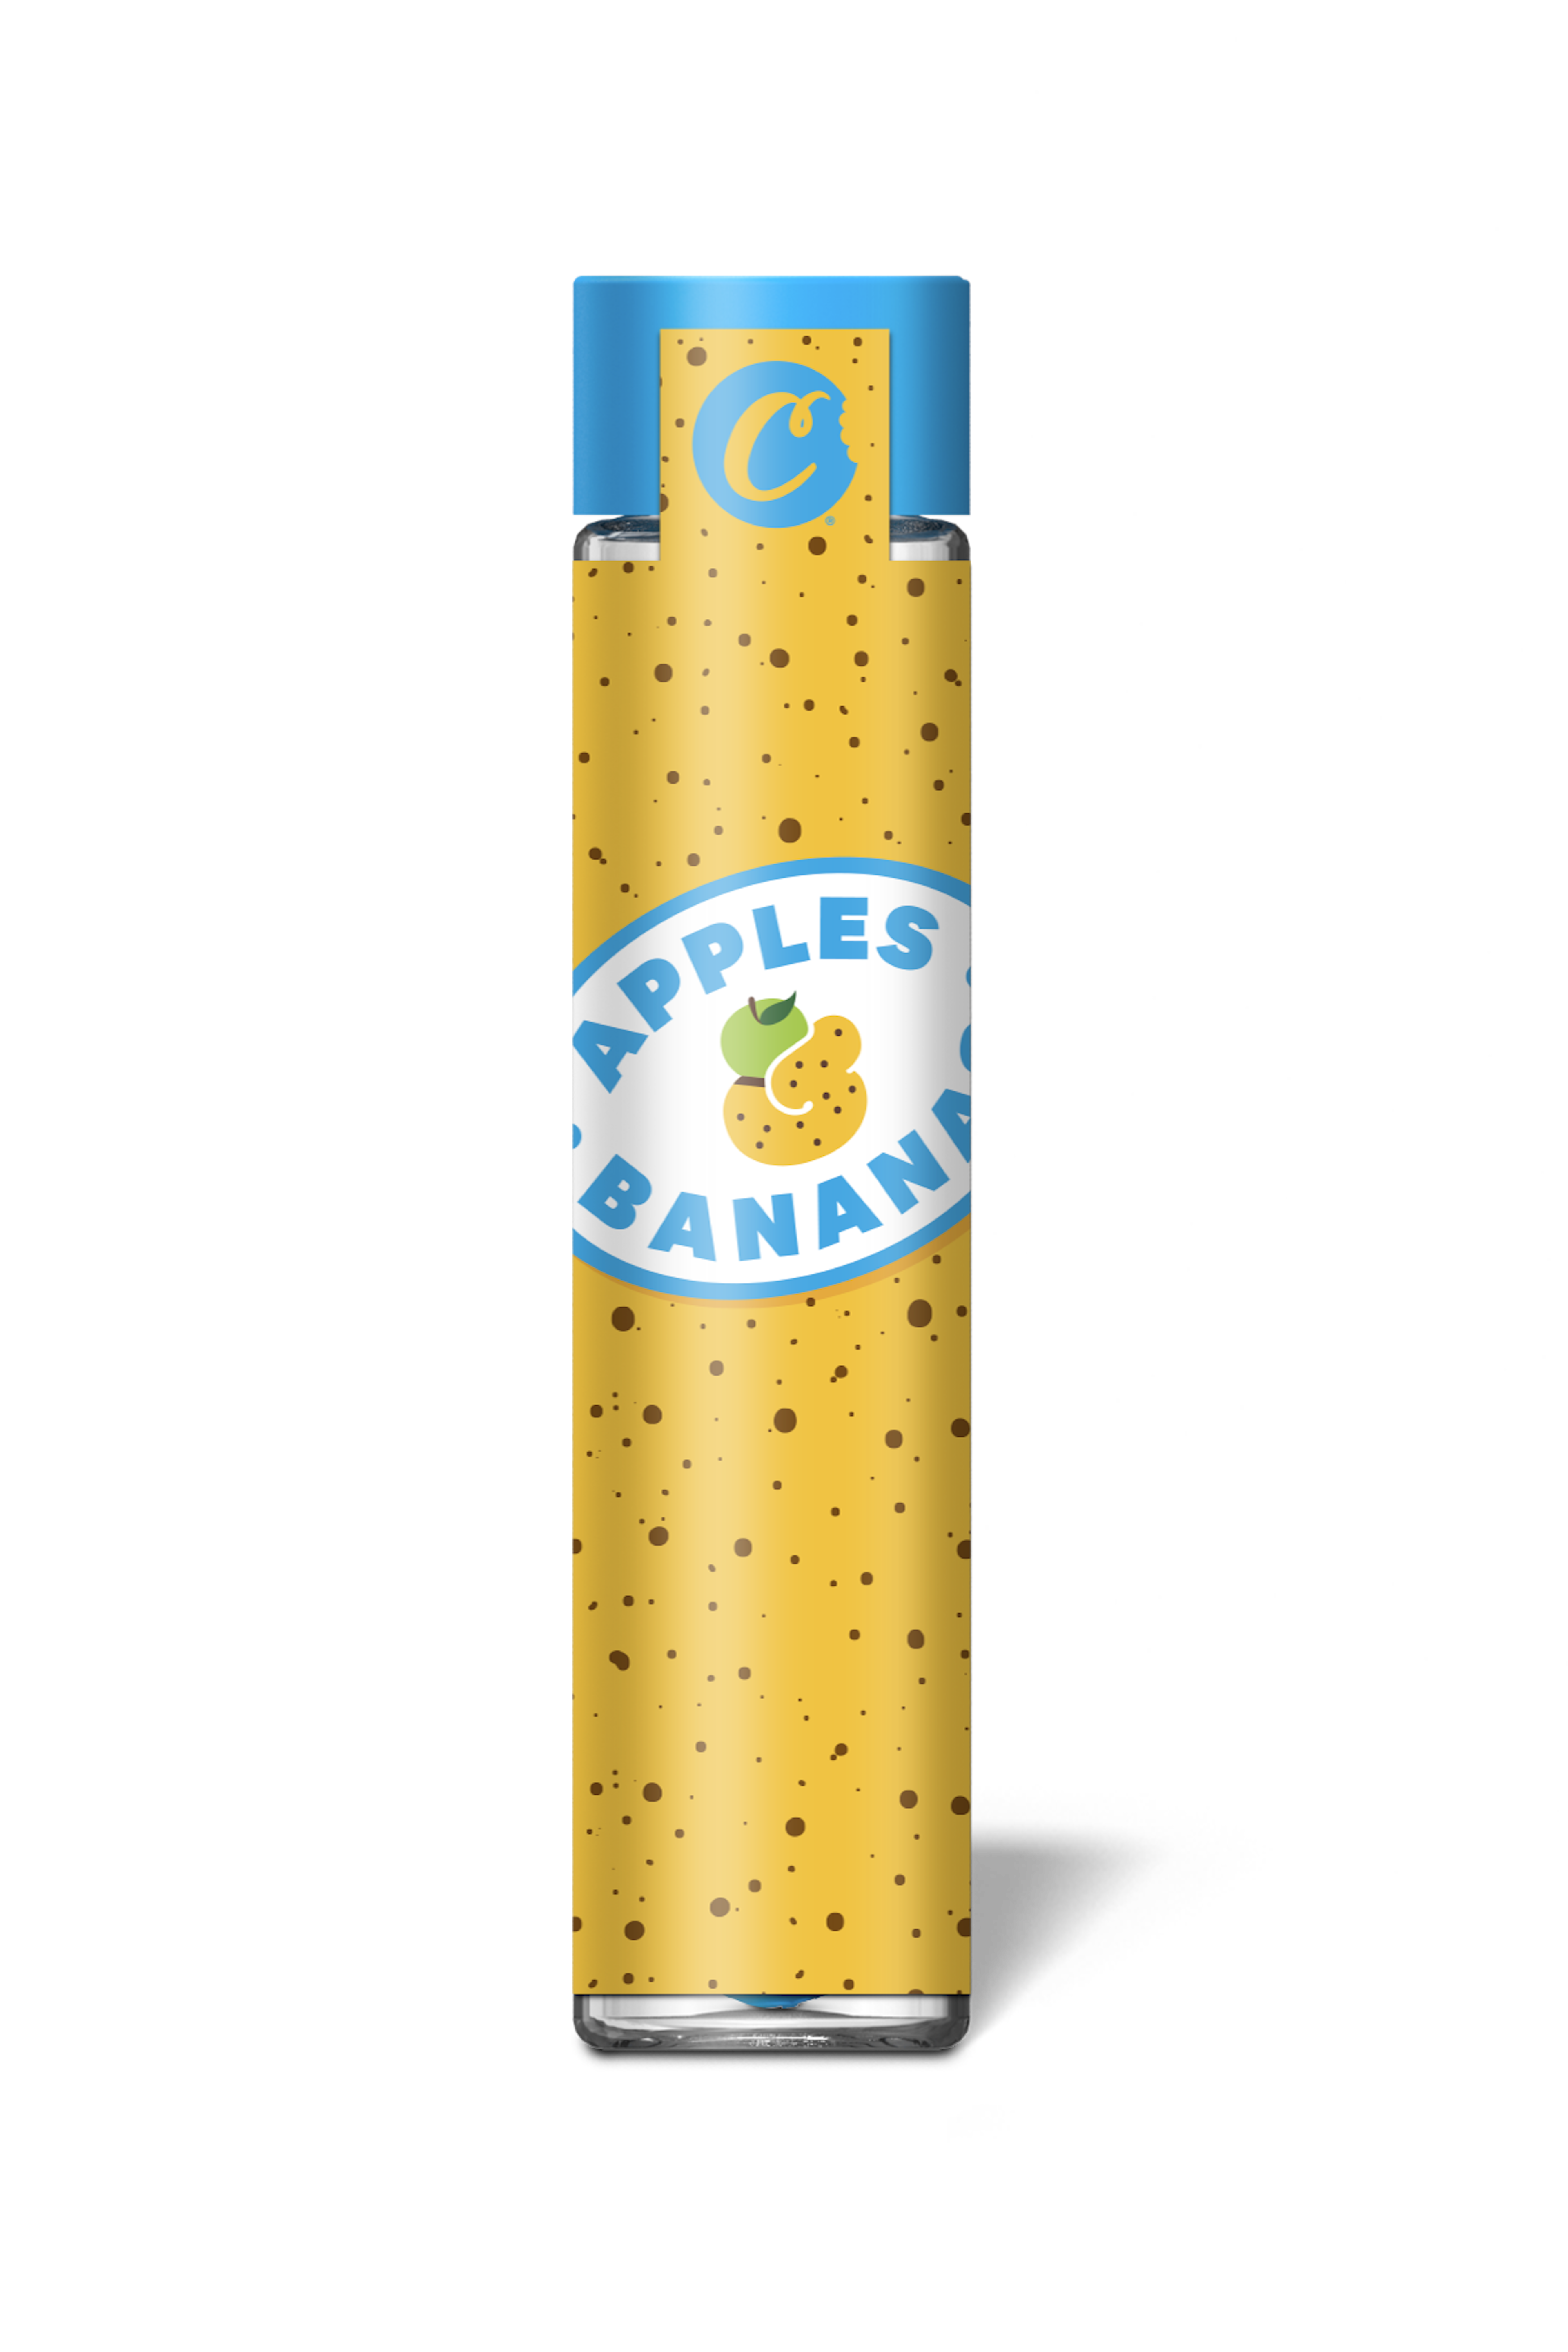 Cookies - Apples & Bananas - THC - Indoor - Non Infused - Joint - Preroll - Tube - 1g - CA